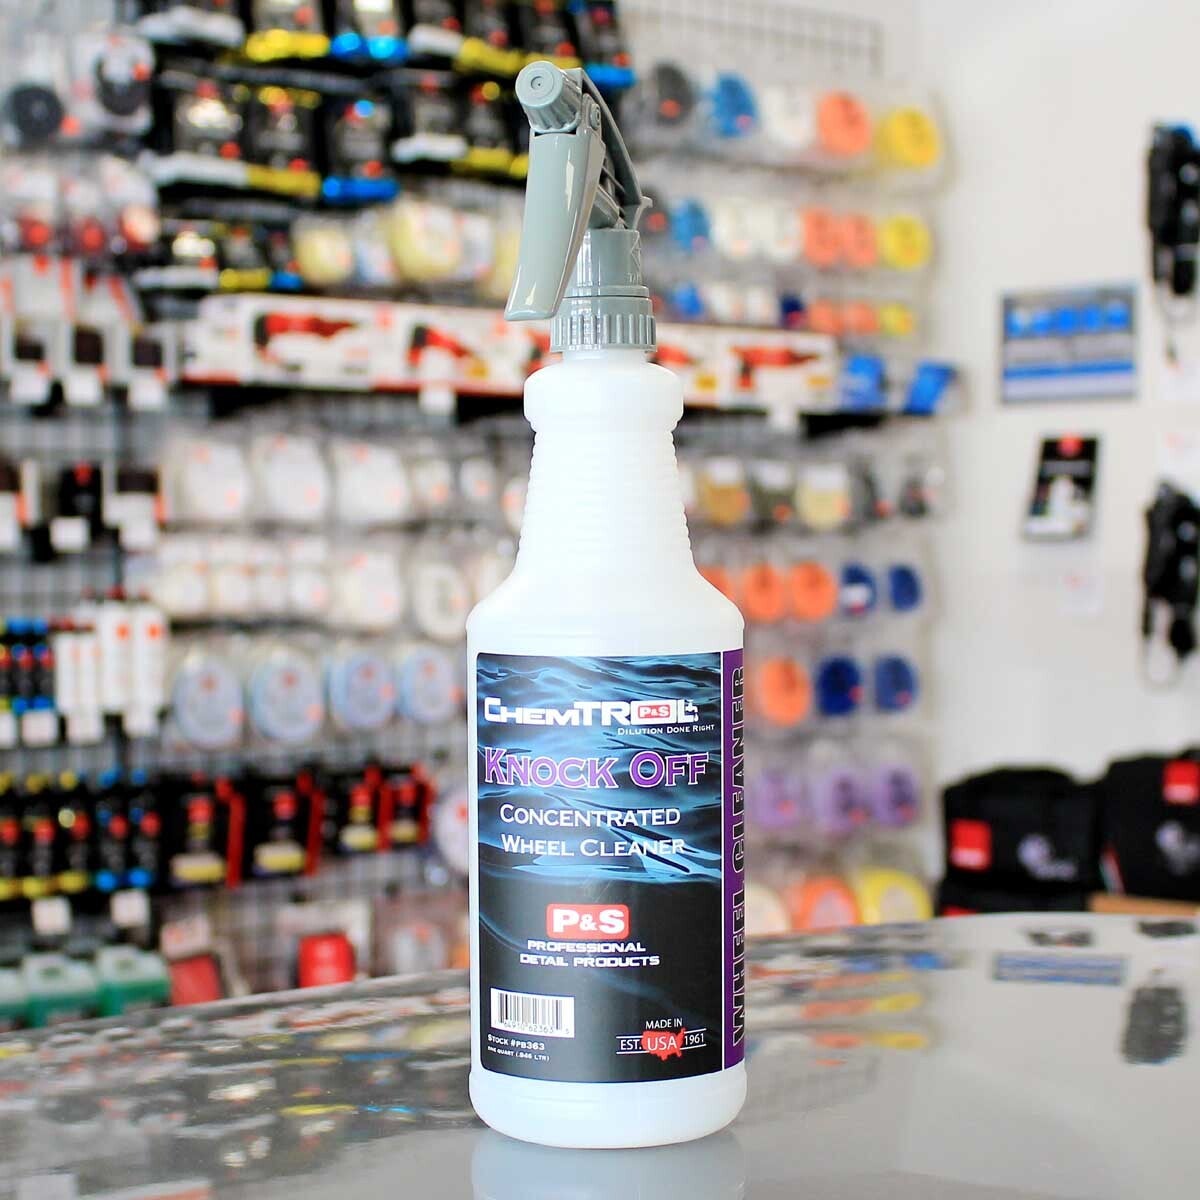 Knock Off Concentrated Wheel Cleaner – P & S Detail Products